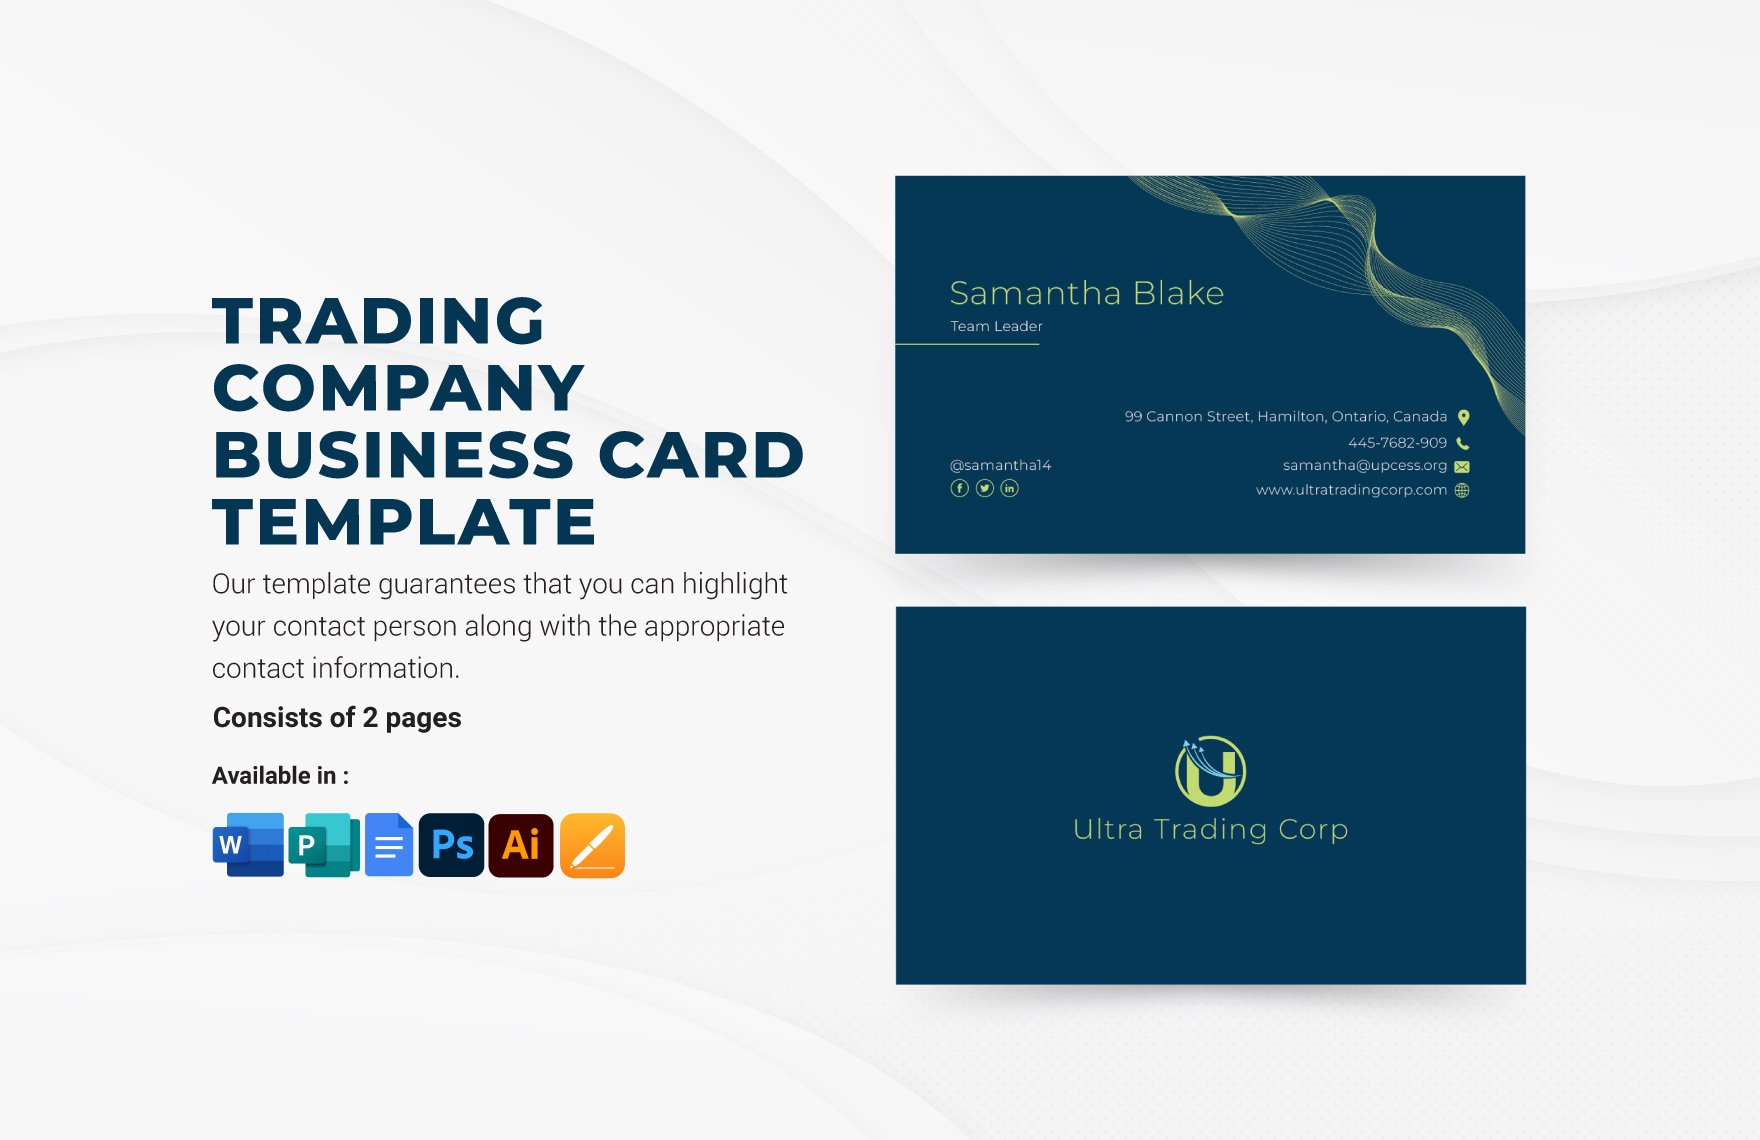 Free Trading Company Business Card Template in Word, Google Docs, Illustrator, PSD, Apple Pages, Publisher